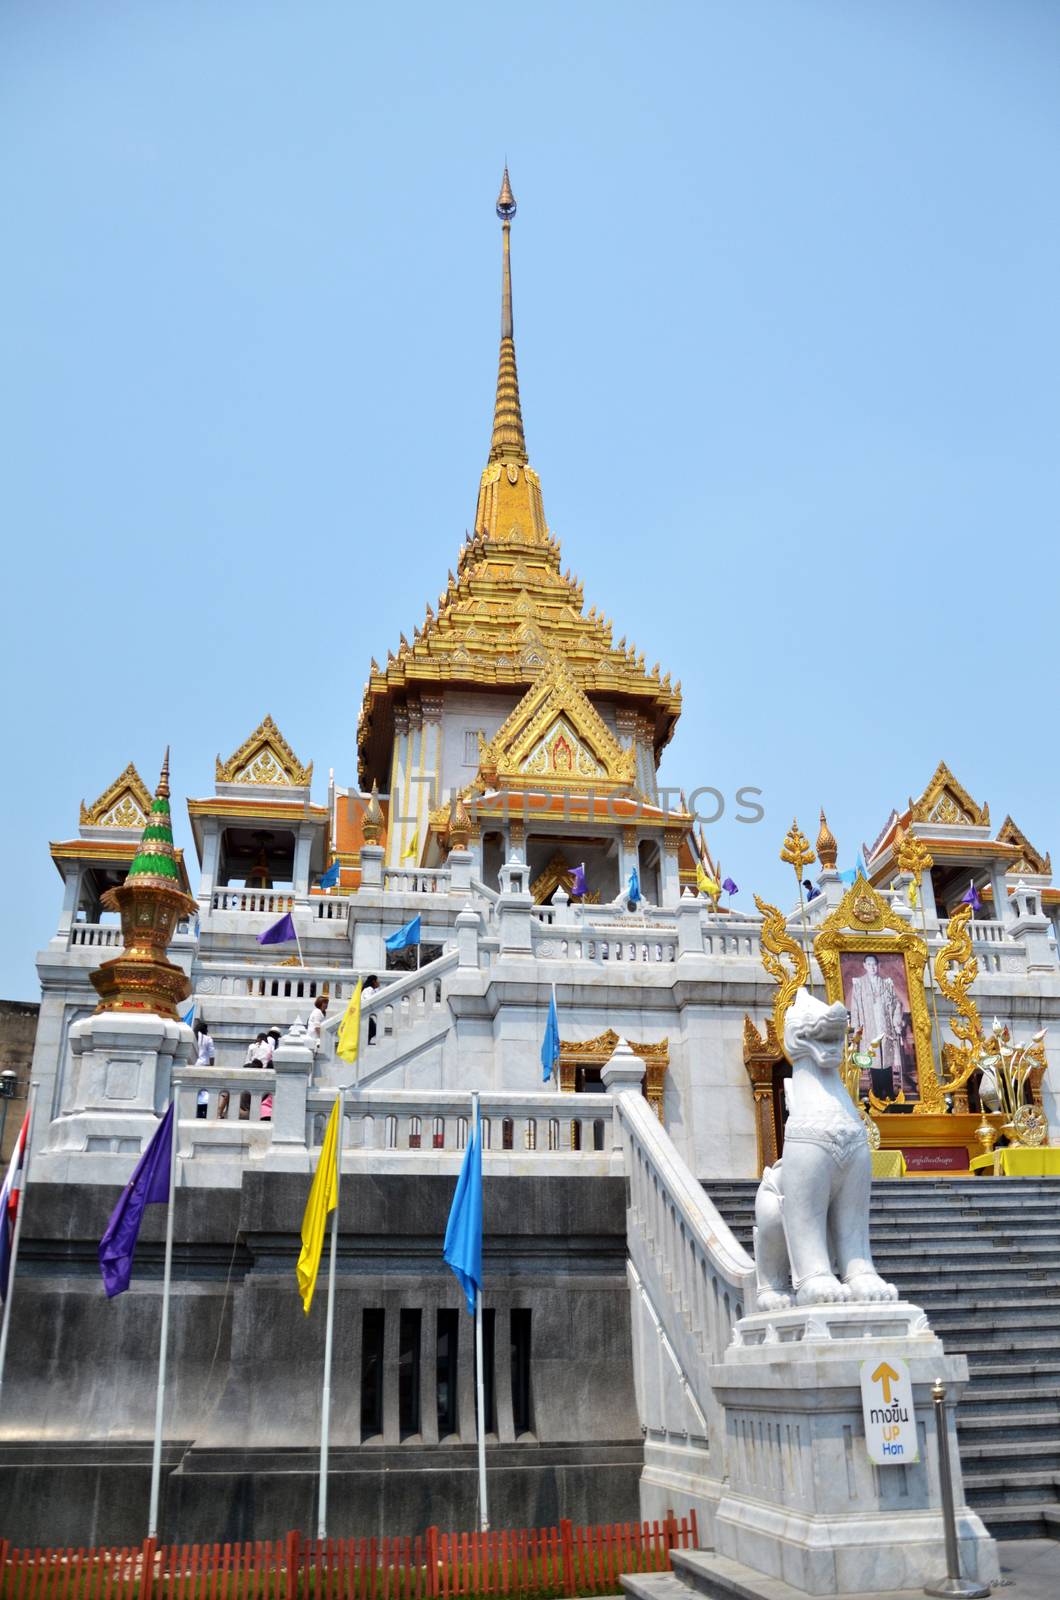 Wat Traimit (The Temple of the Golden Buddha) in Bangkok, Thailand